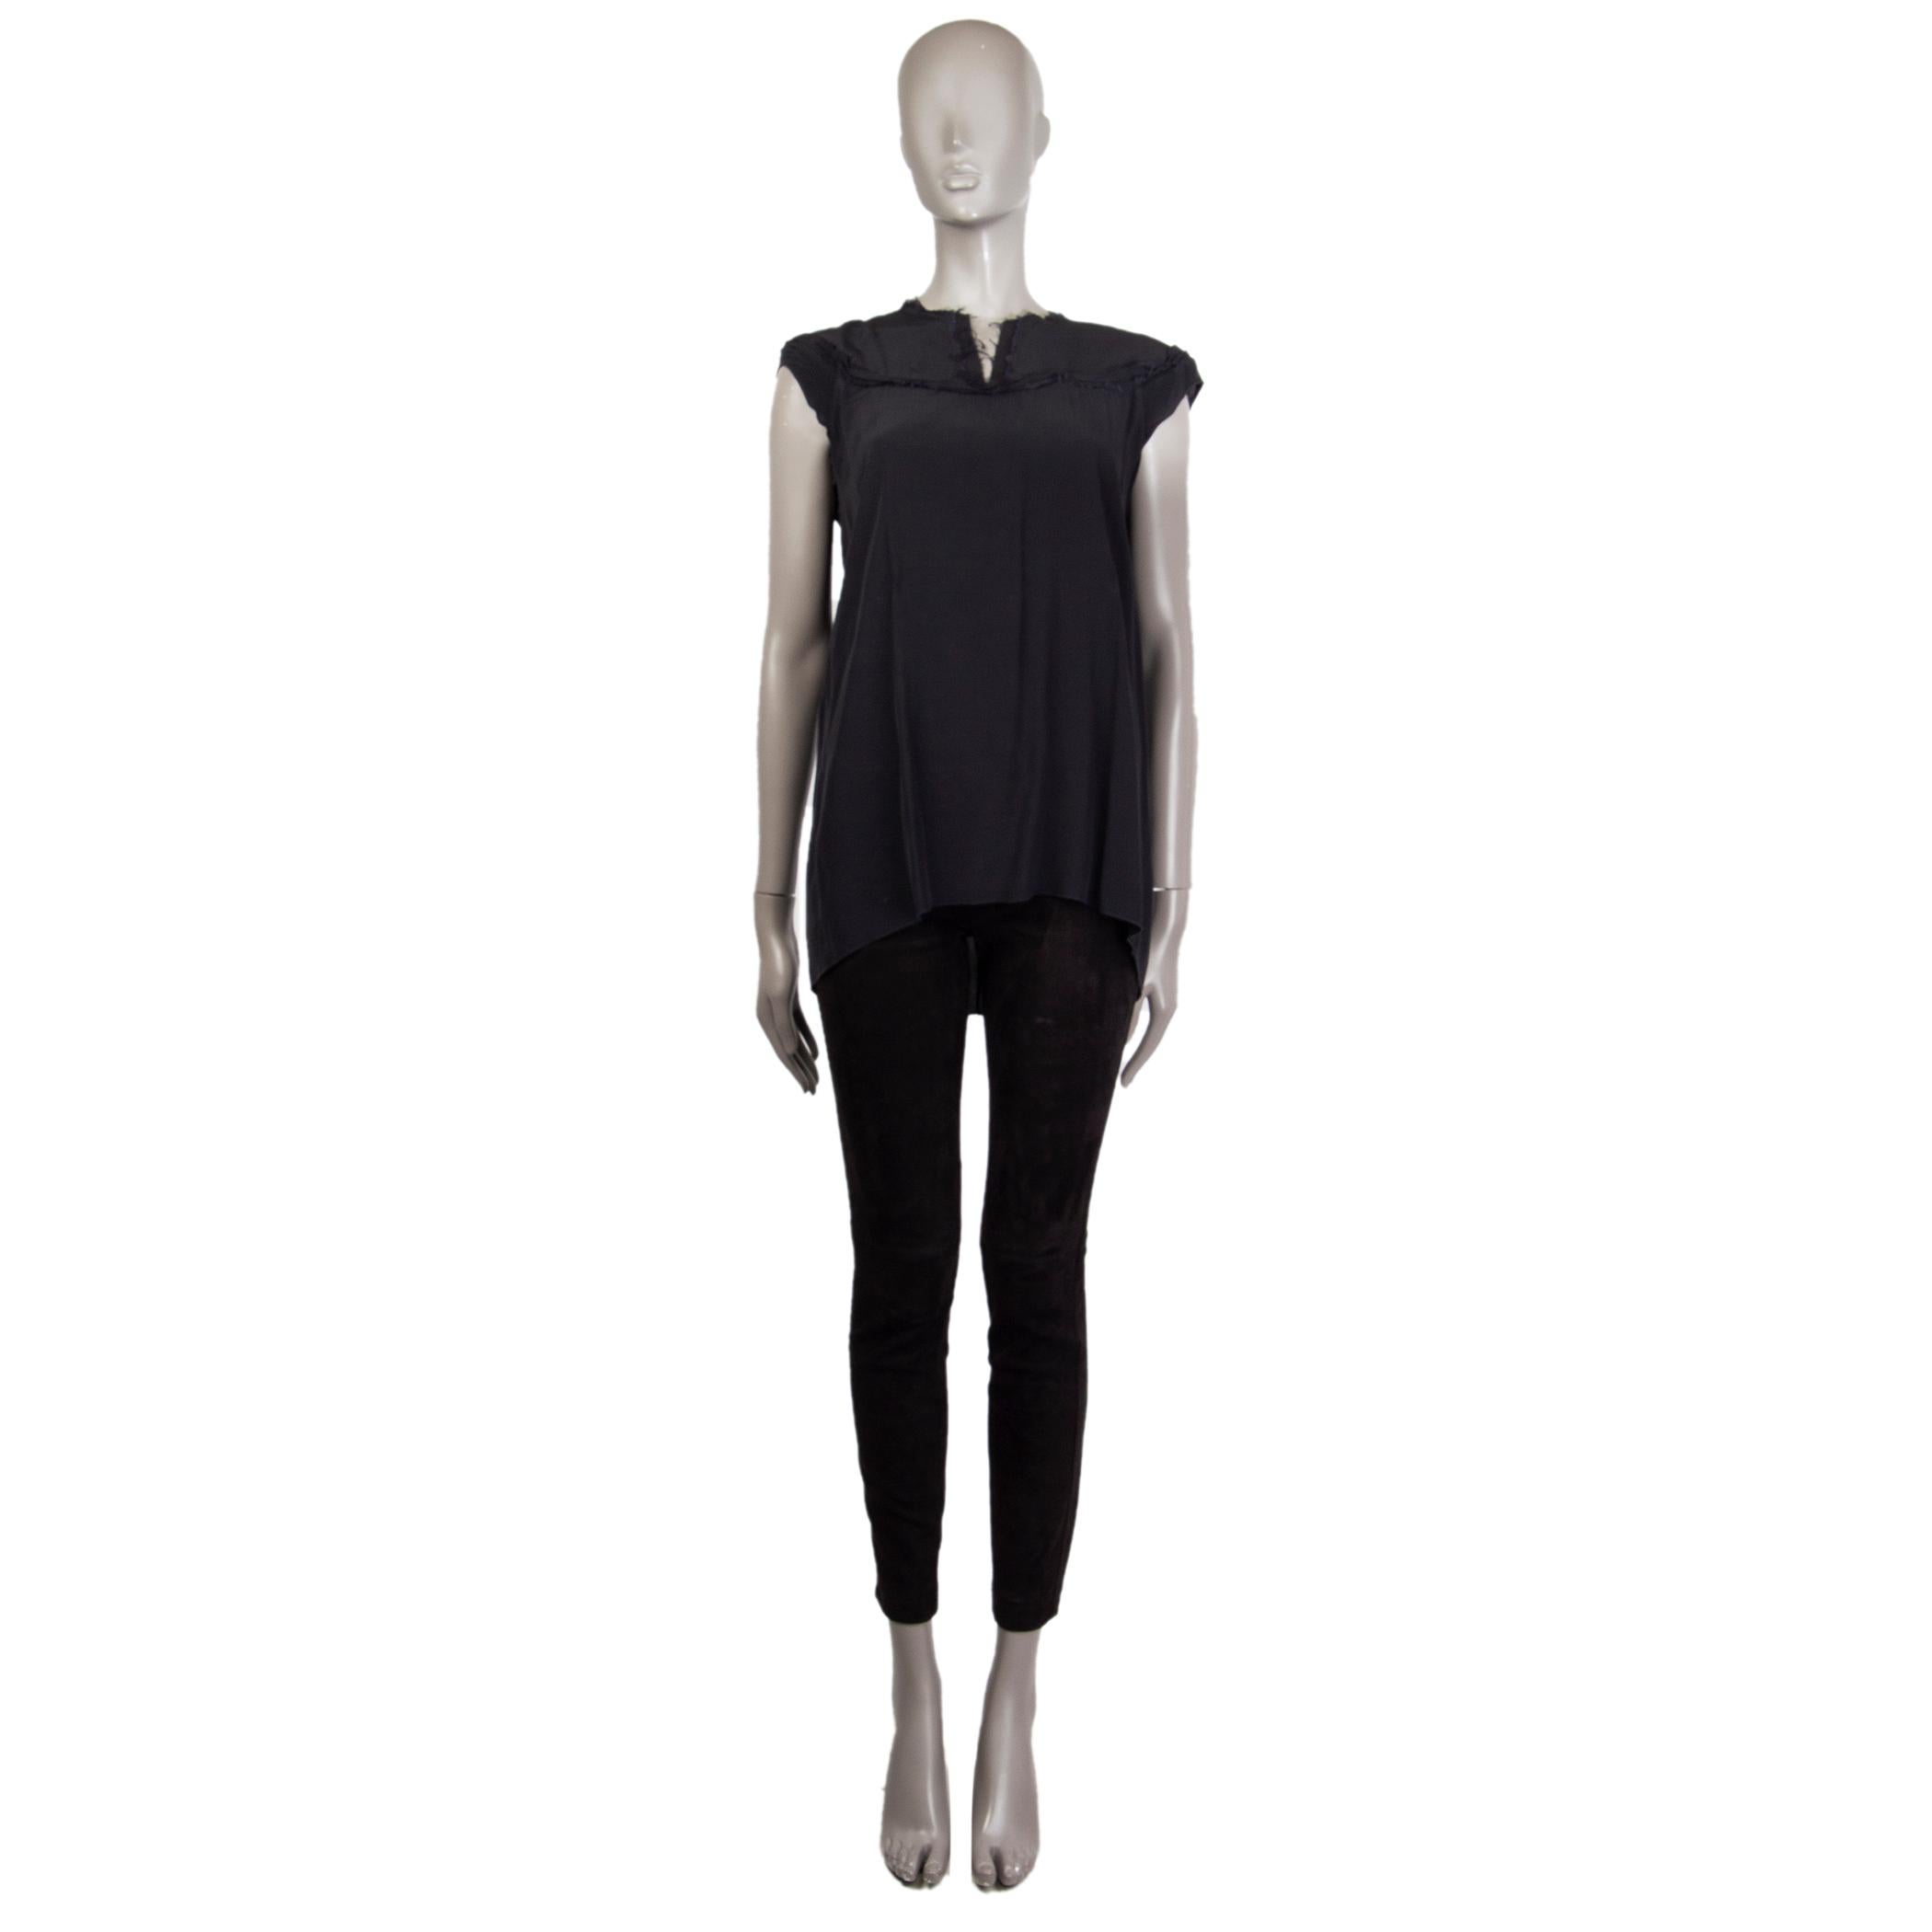 100% authentic Marni cap-sleeved top in night blue viscose (100%). With a flared fit, slit-cut-out in the front. Detailed with a fringed seam around the neckline. Closes with a zipper in the back. Has been worn and is in an excellent